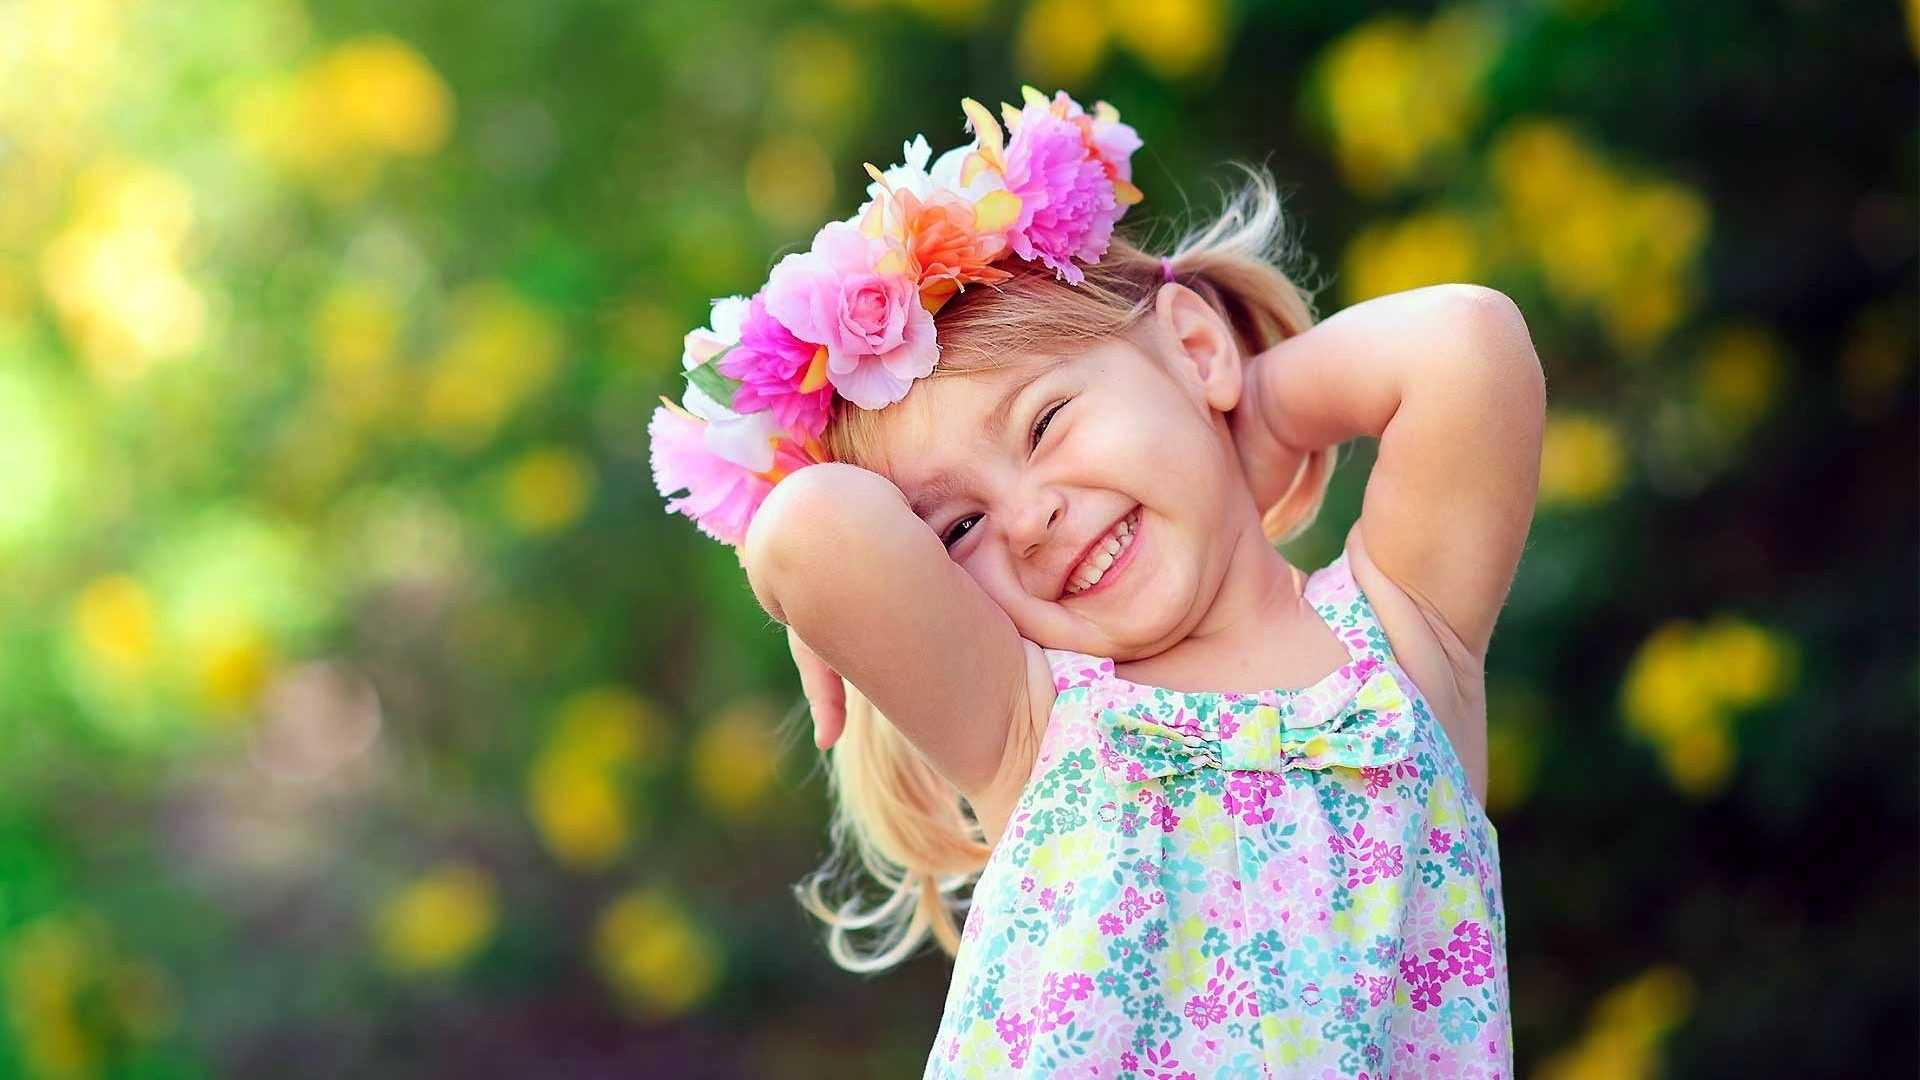 Laughing Babies Wallpapers HD Best Collection Of Cute Babies